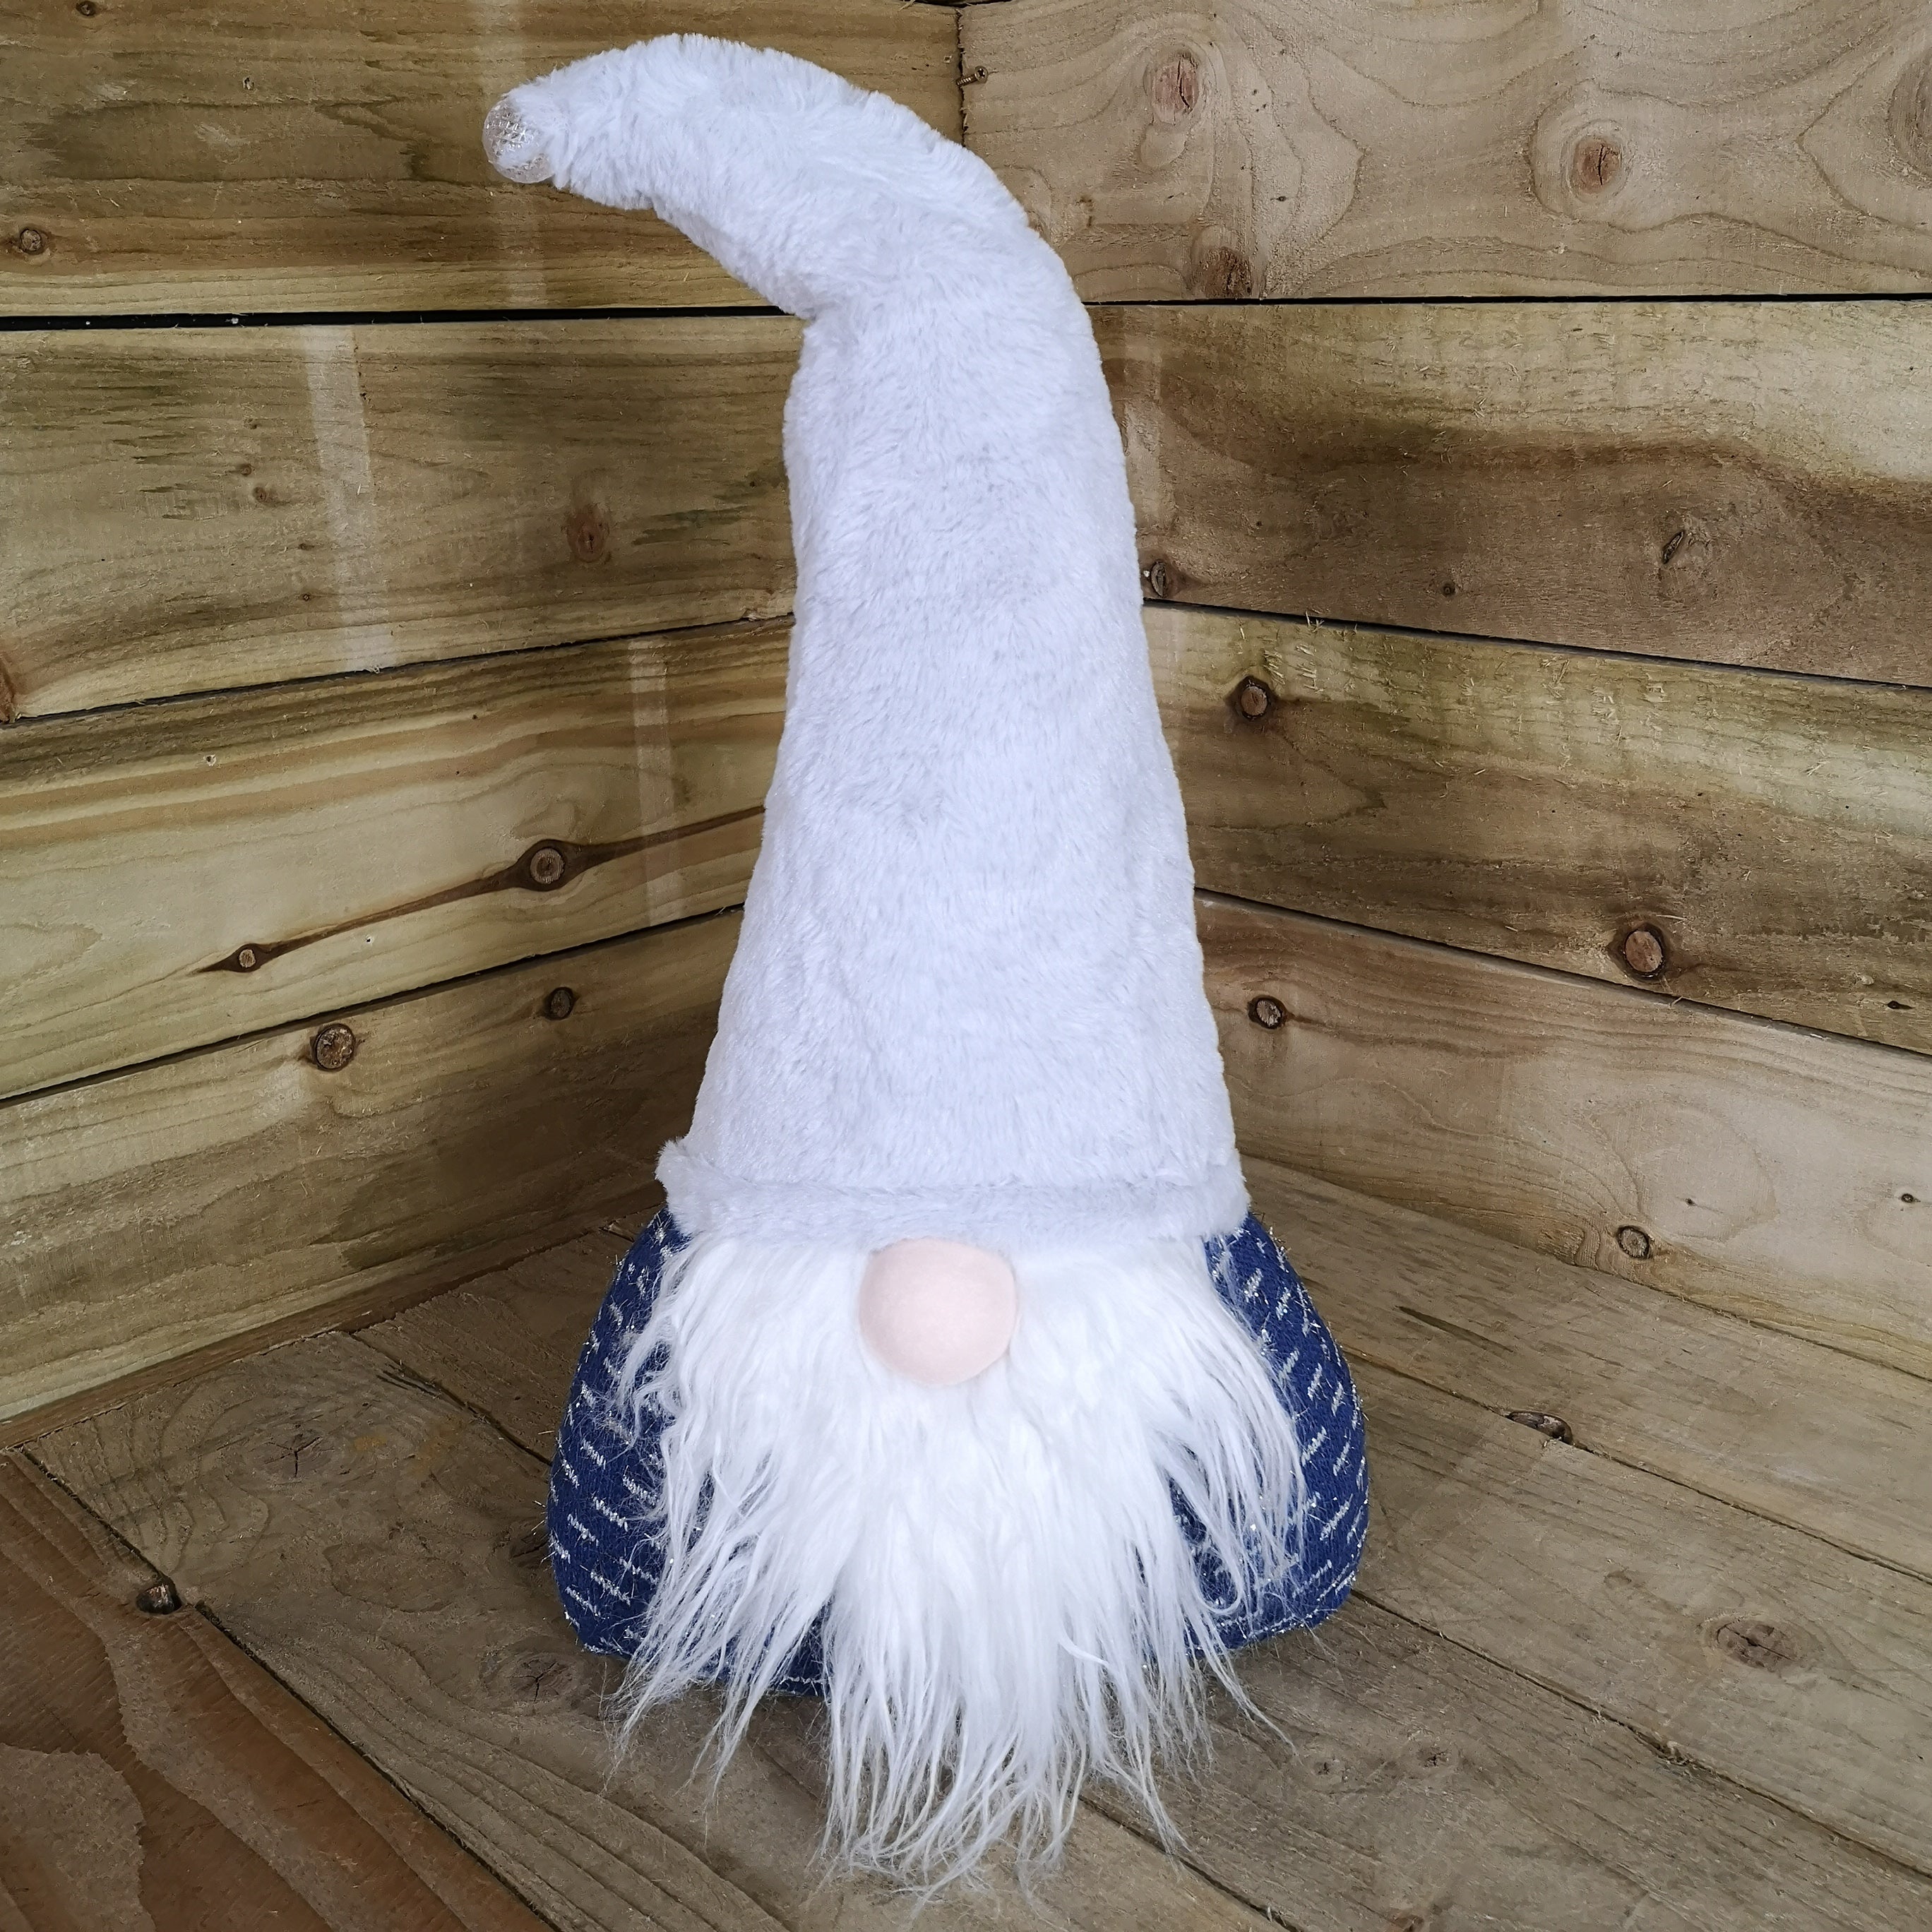 60cm Festive Christmas Light Up Lit Sitting Christmas Gonk with Grey Hat and Blue Body